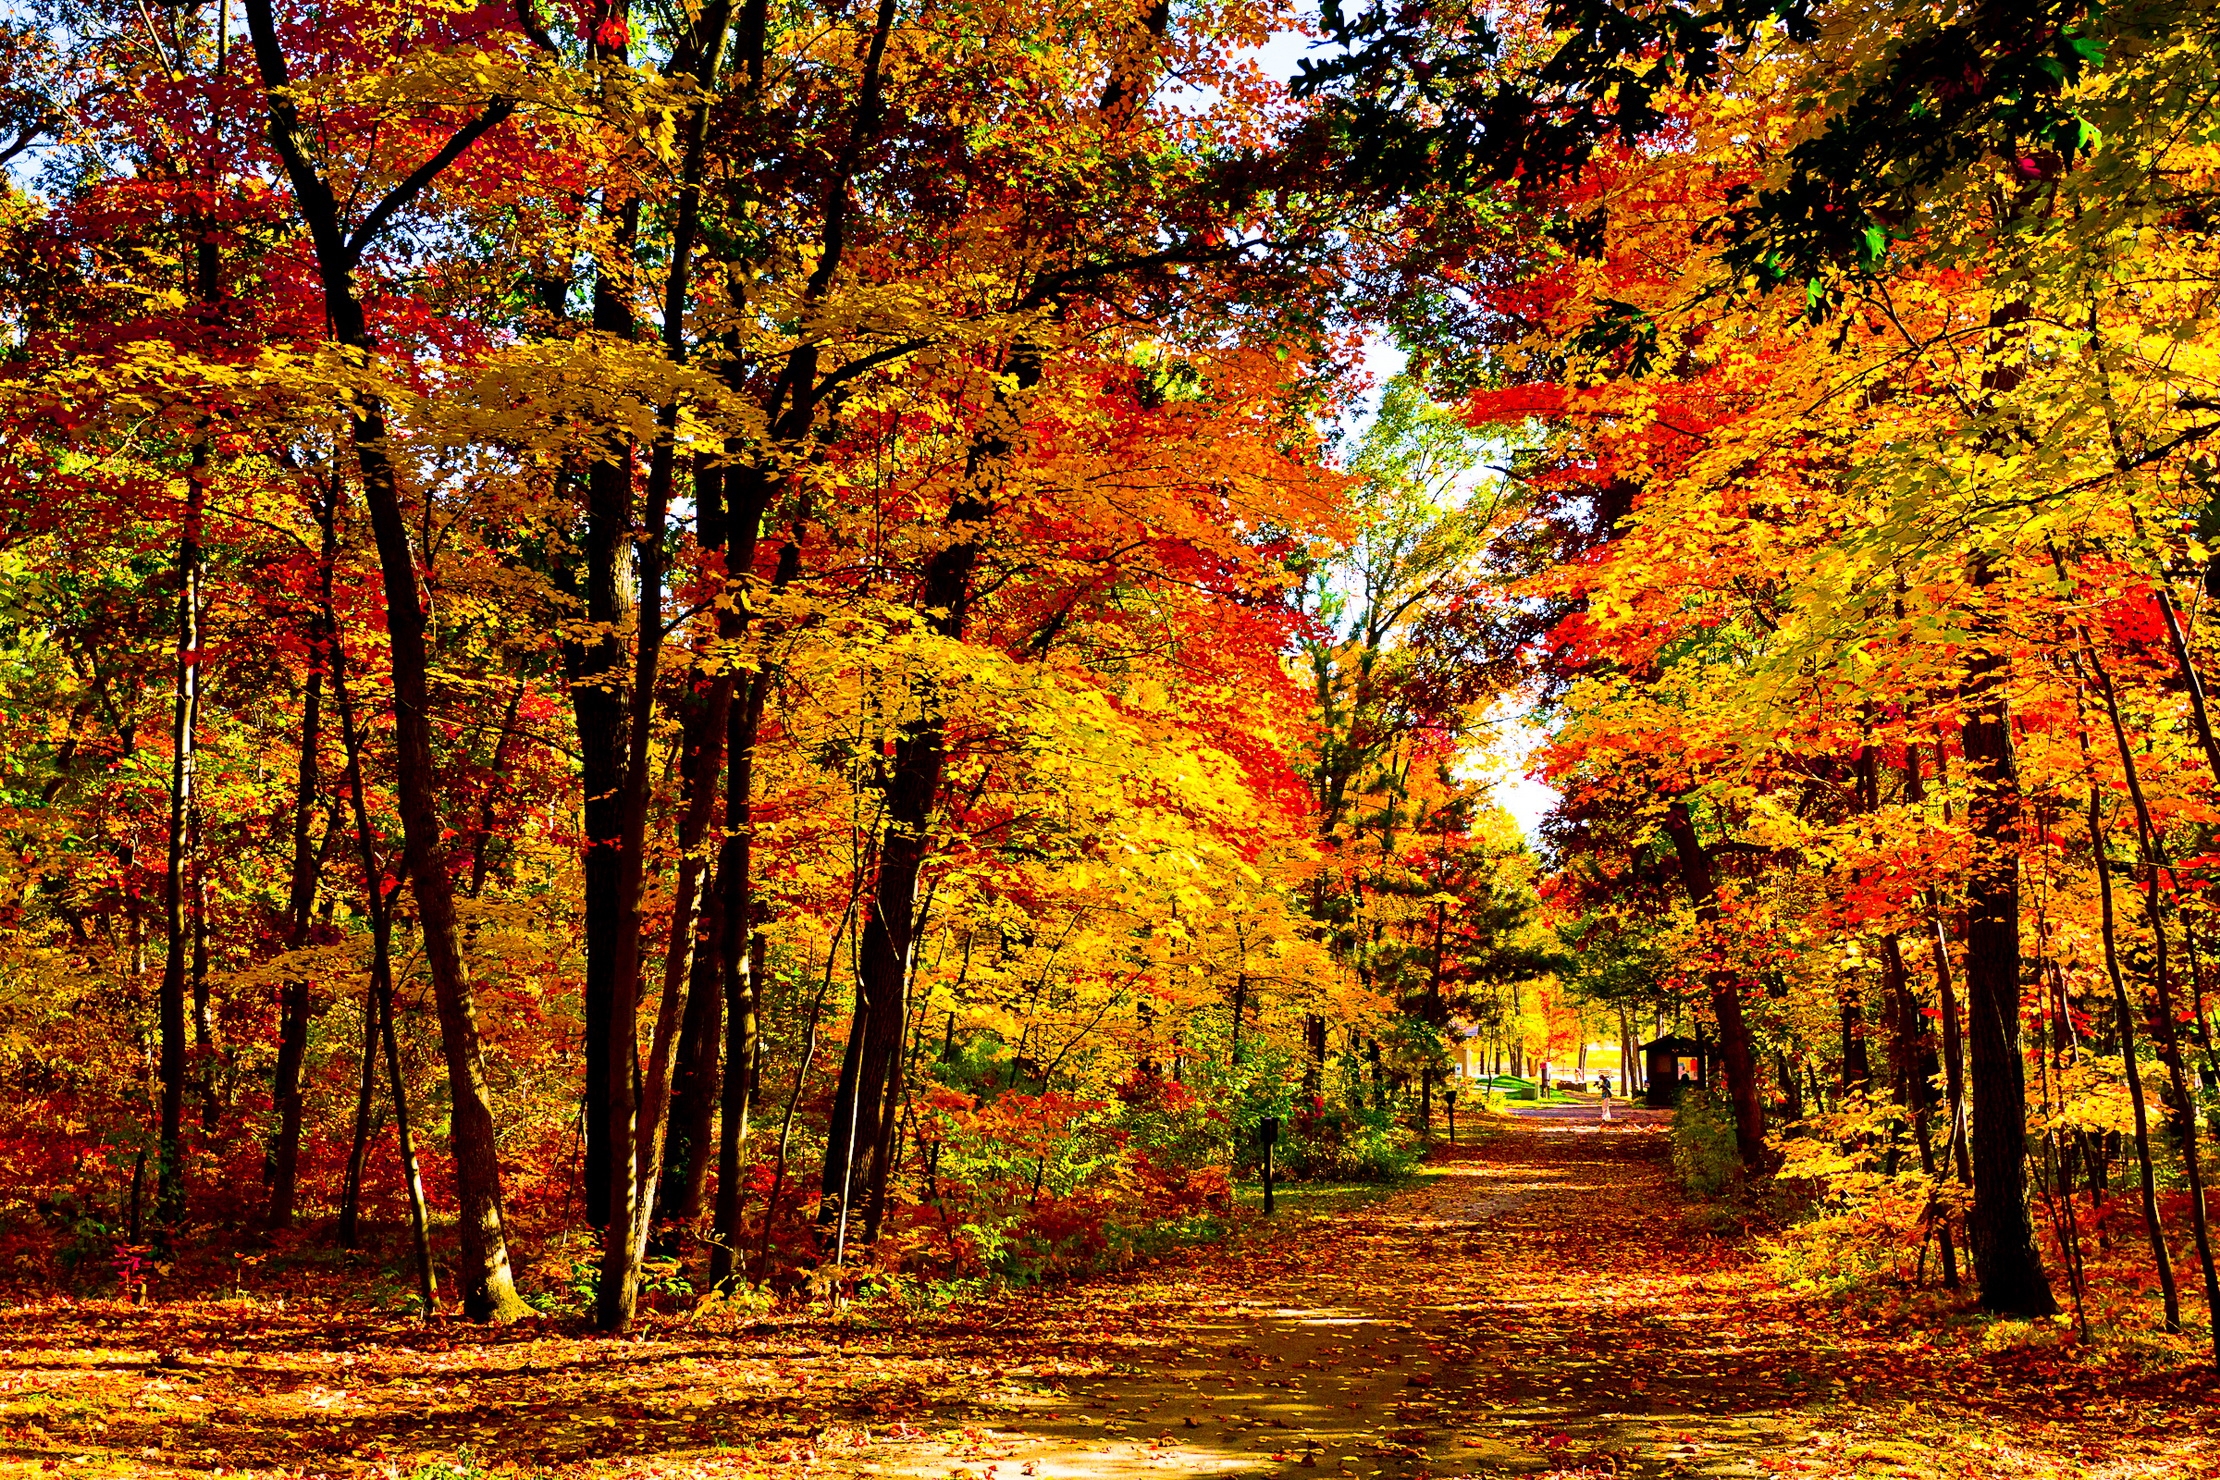 desktop Images trees, nature, autumn, usa, road, forest, leaf fall, fall, united states, brightly, wisconsin